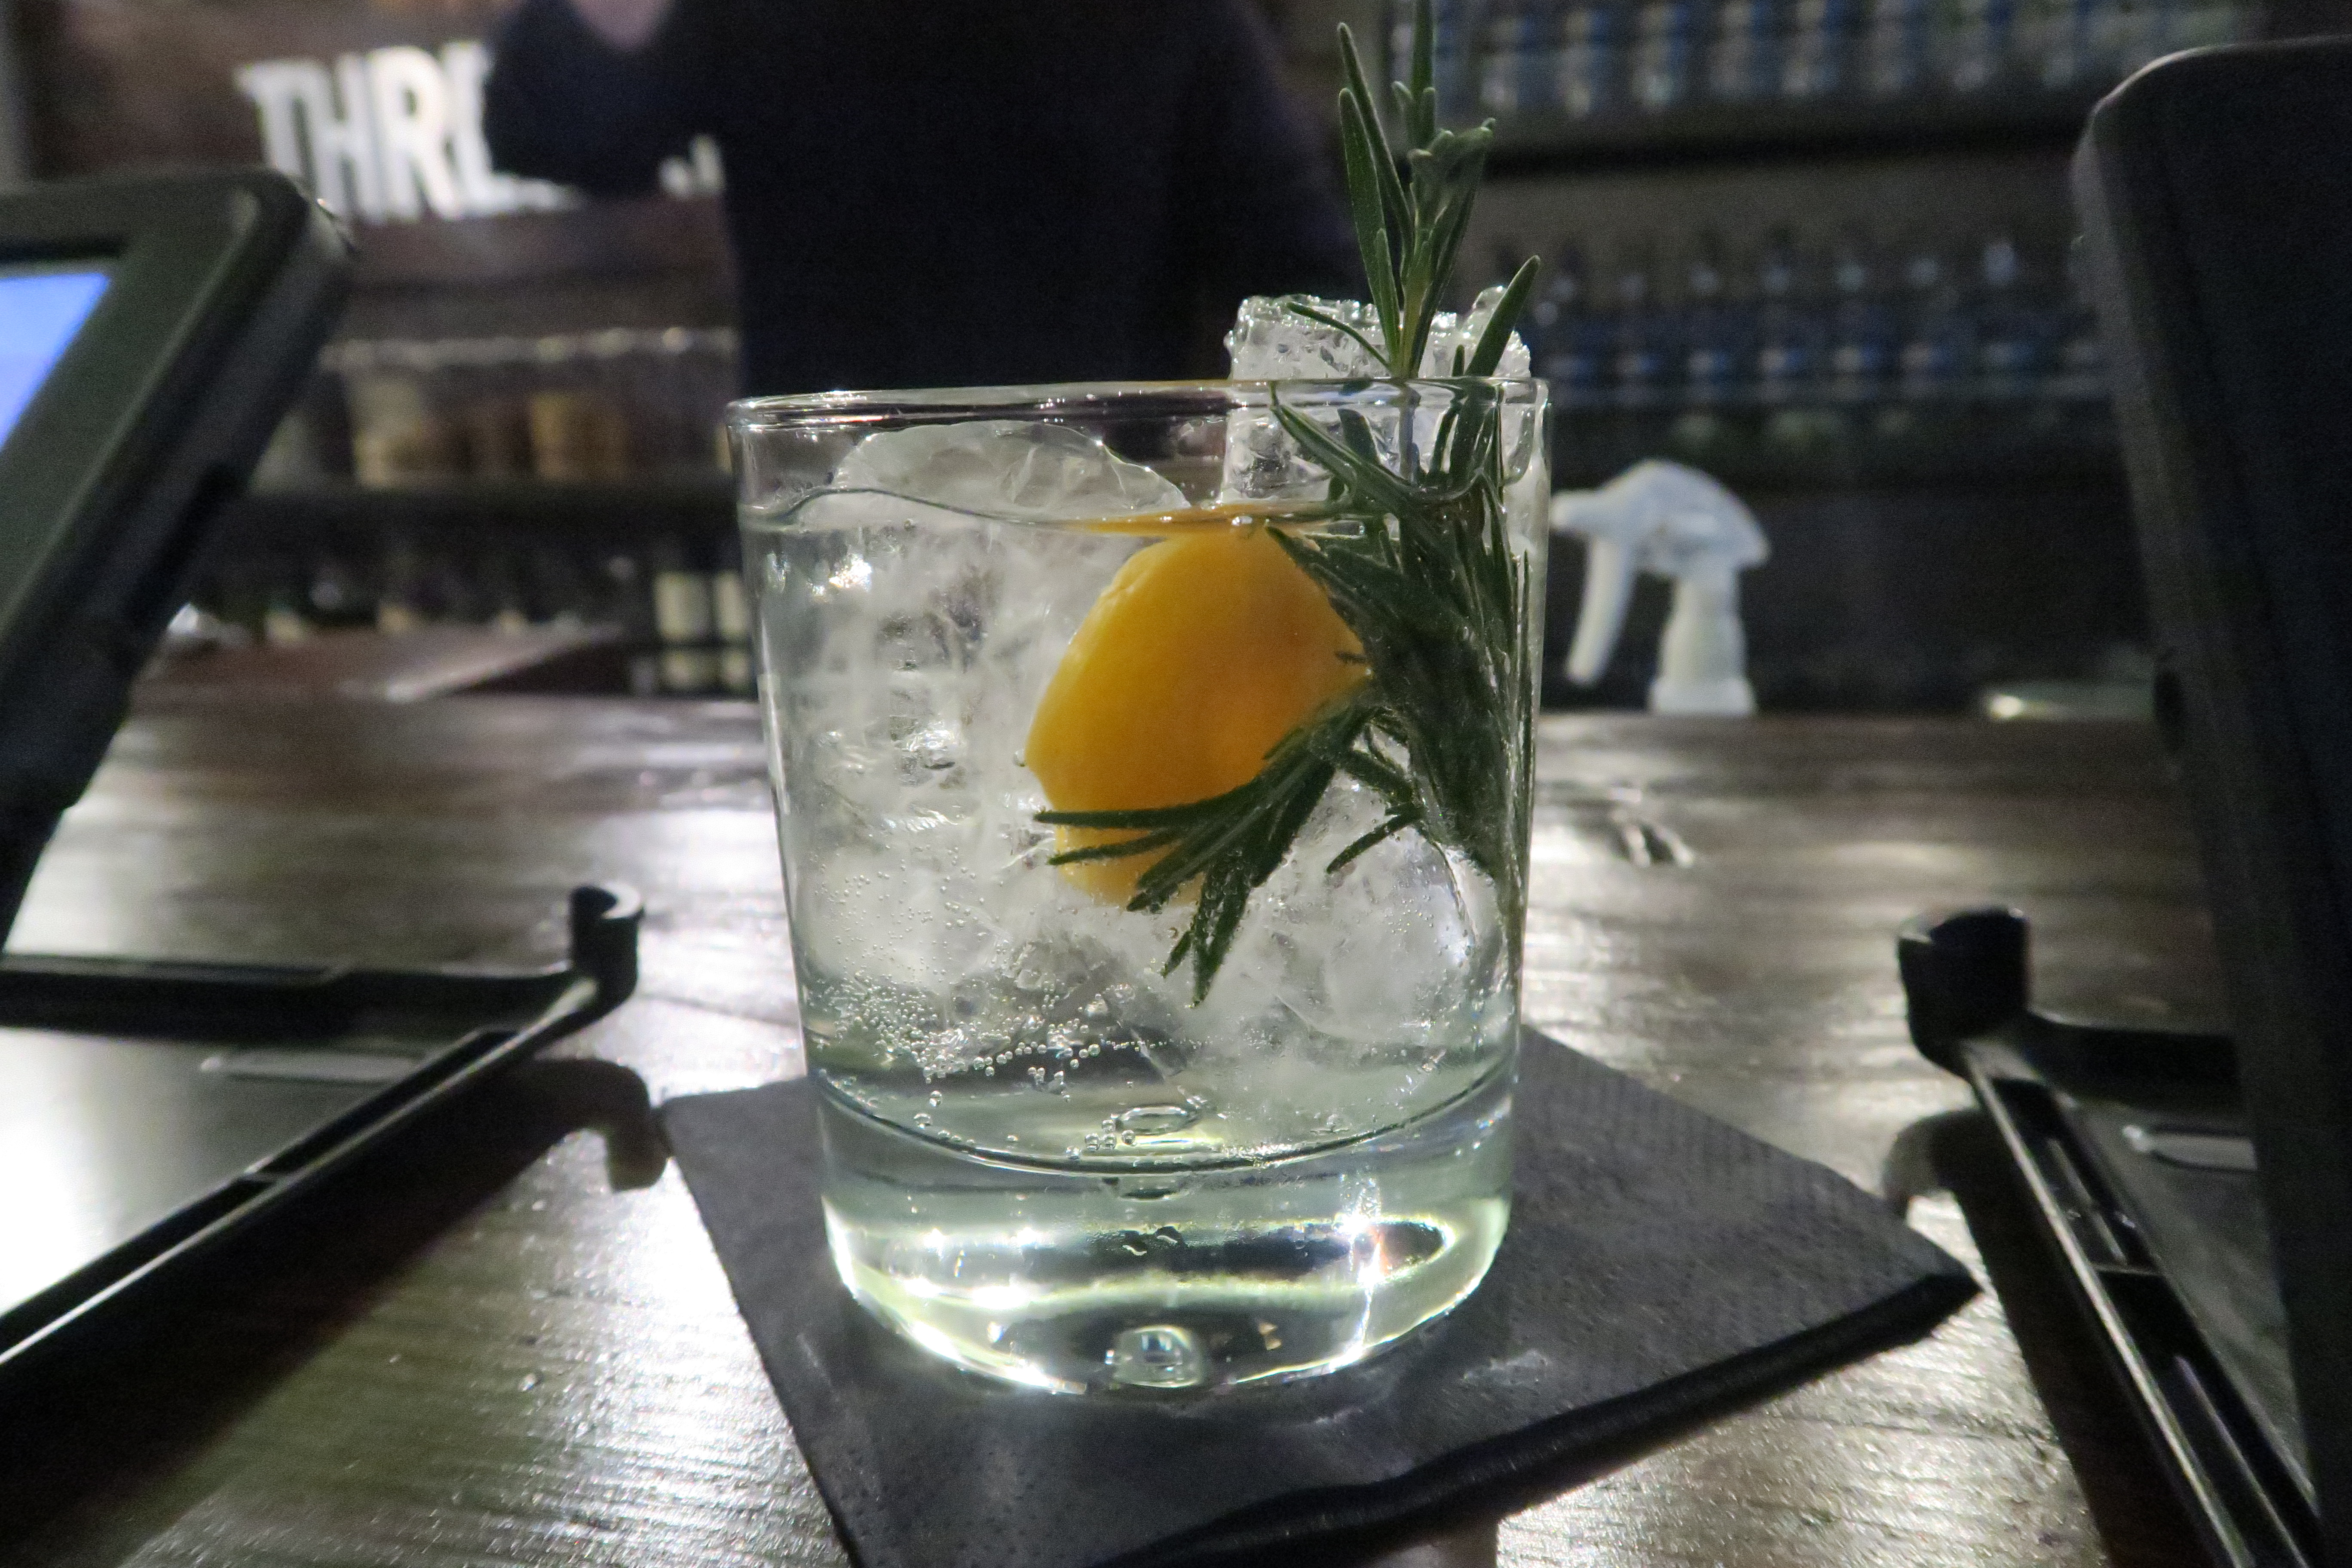 three-rivers-gin-manchester-gin-experience